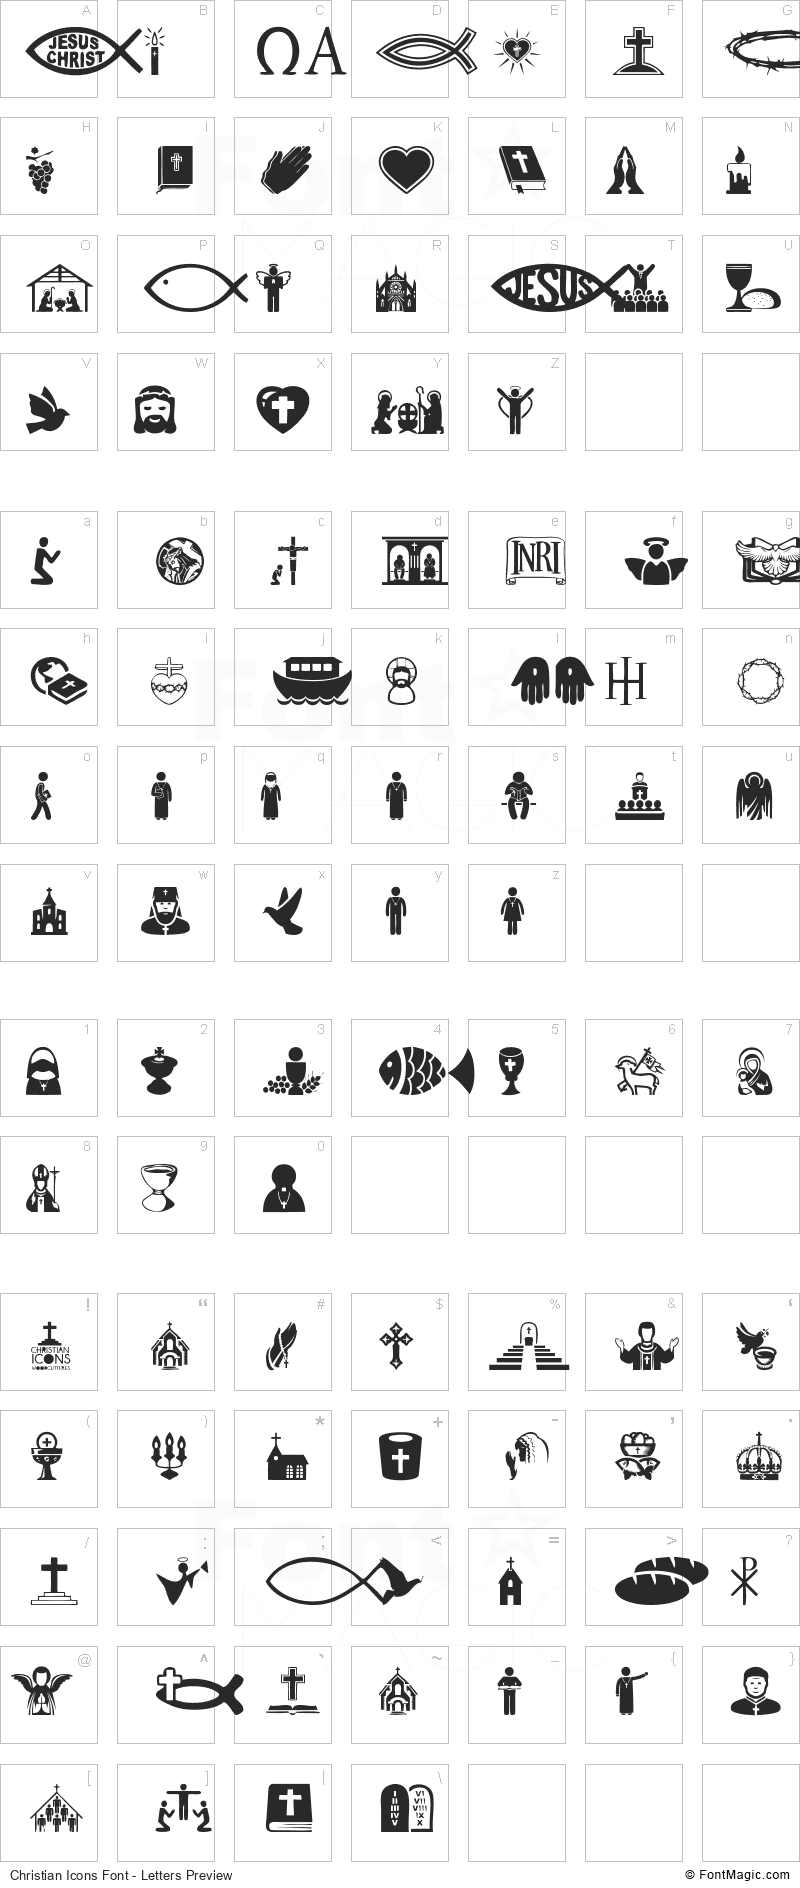 Christian Icons Font - All Latters Preview Chart